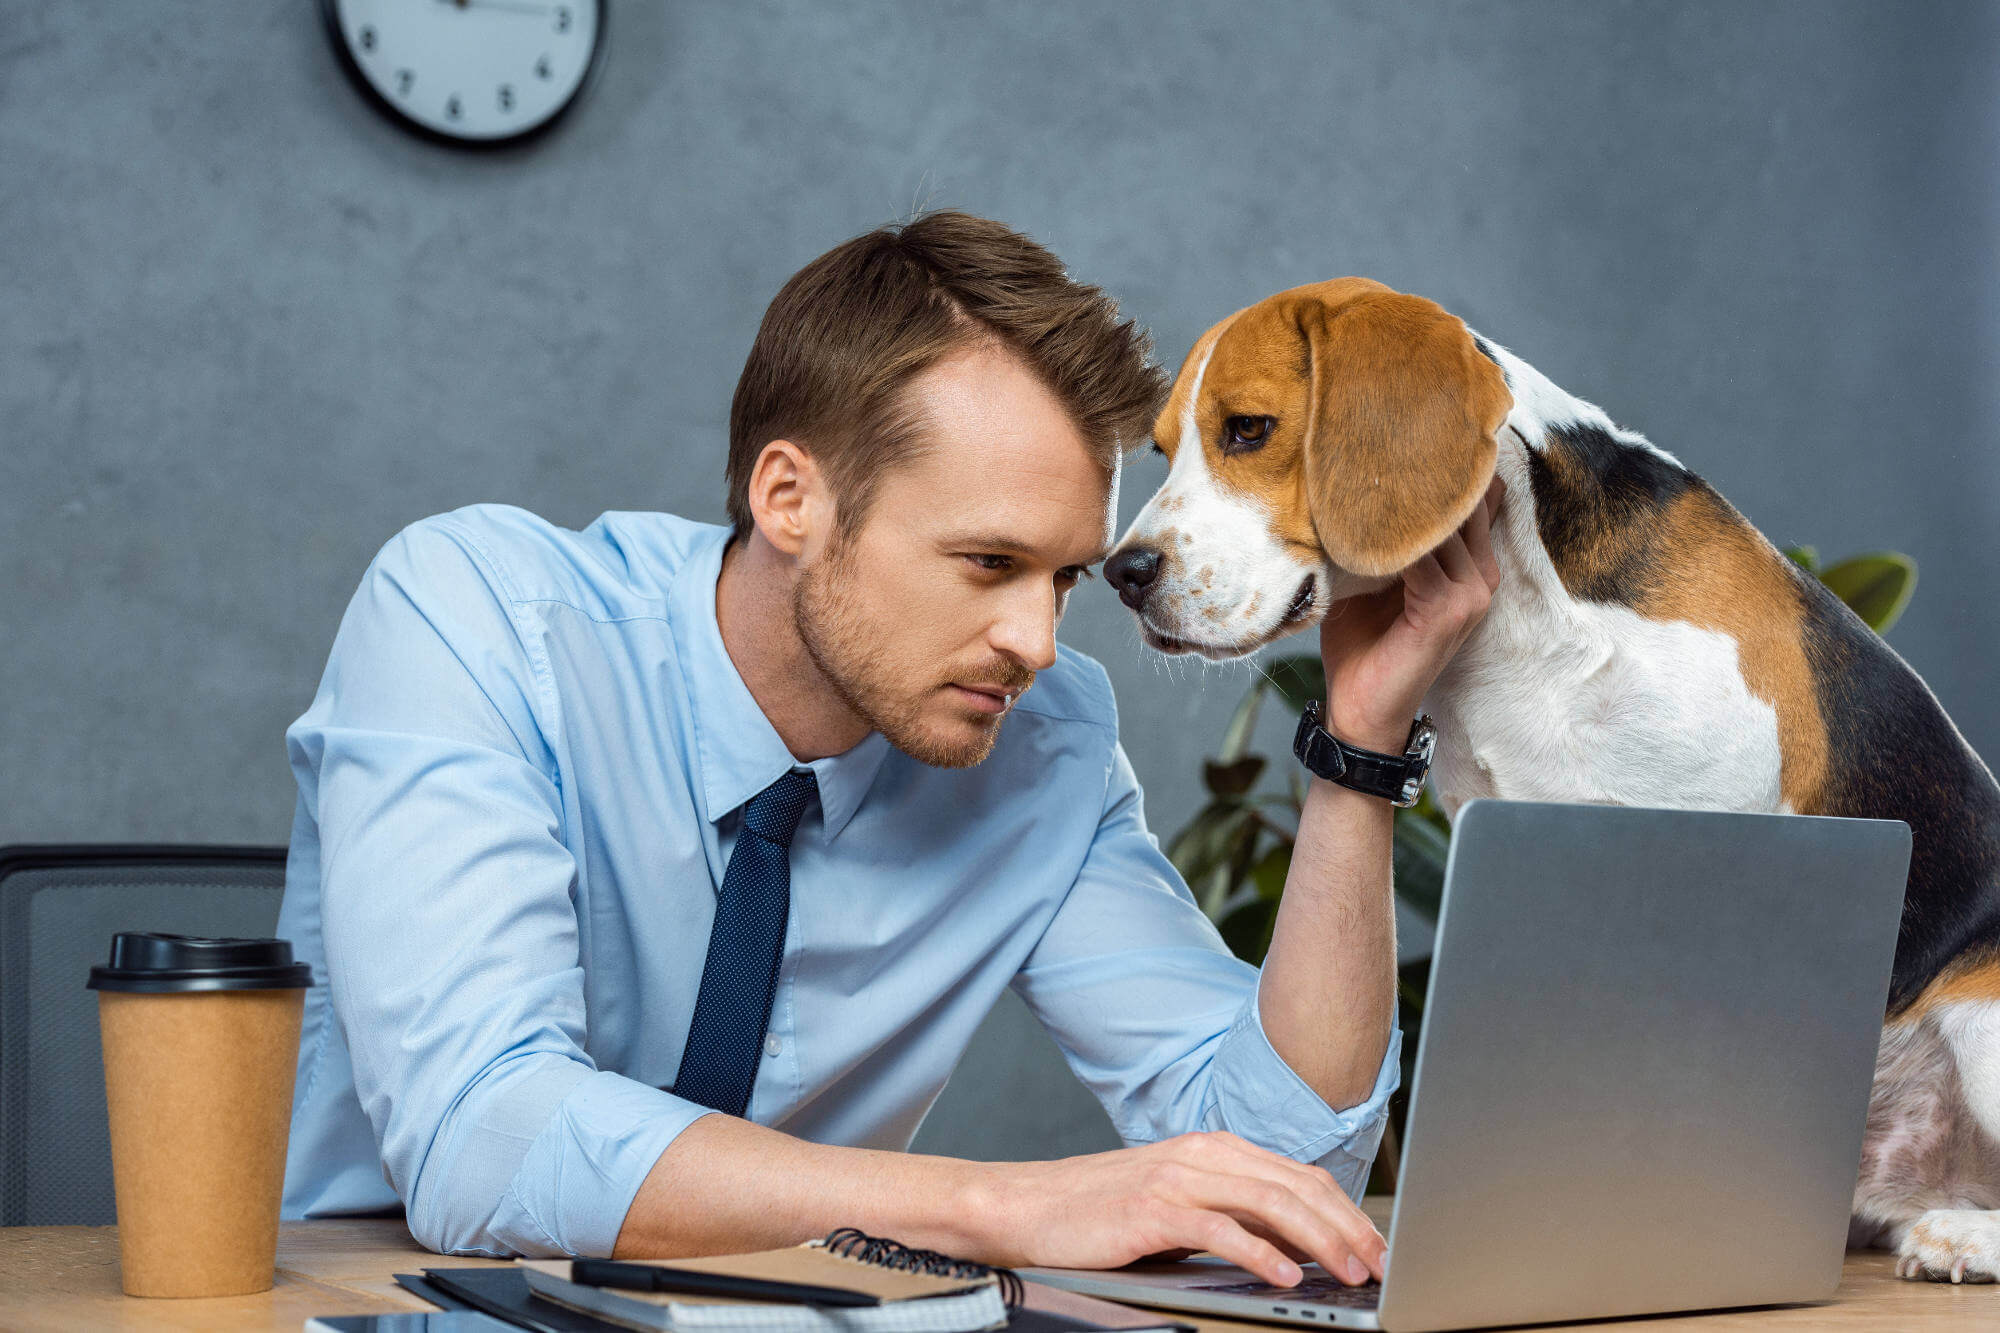 Businesmann in blue shirt petting dog while looking at a laptop